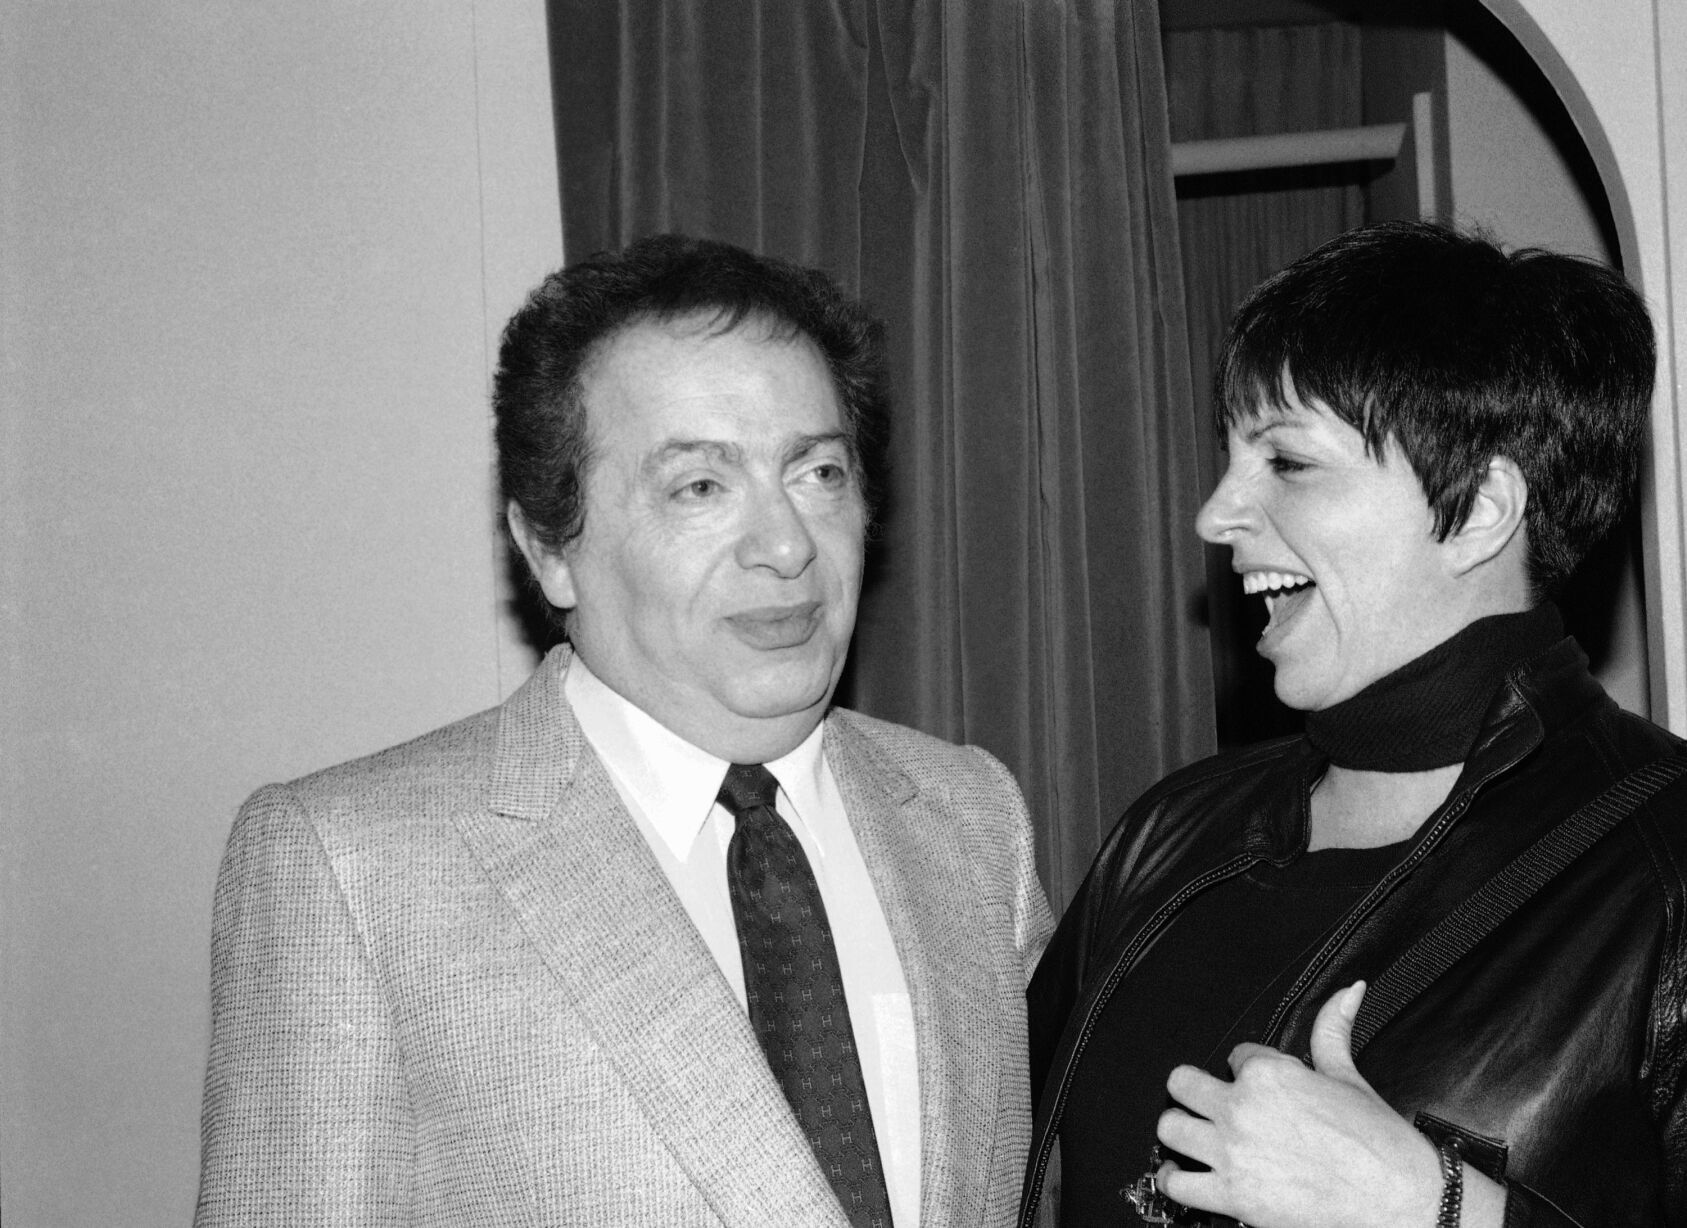 Comic Jackie Mason, who perfected amused outrage, dies at 93 pic